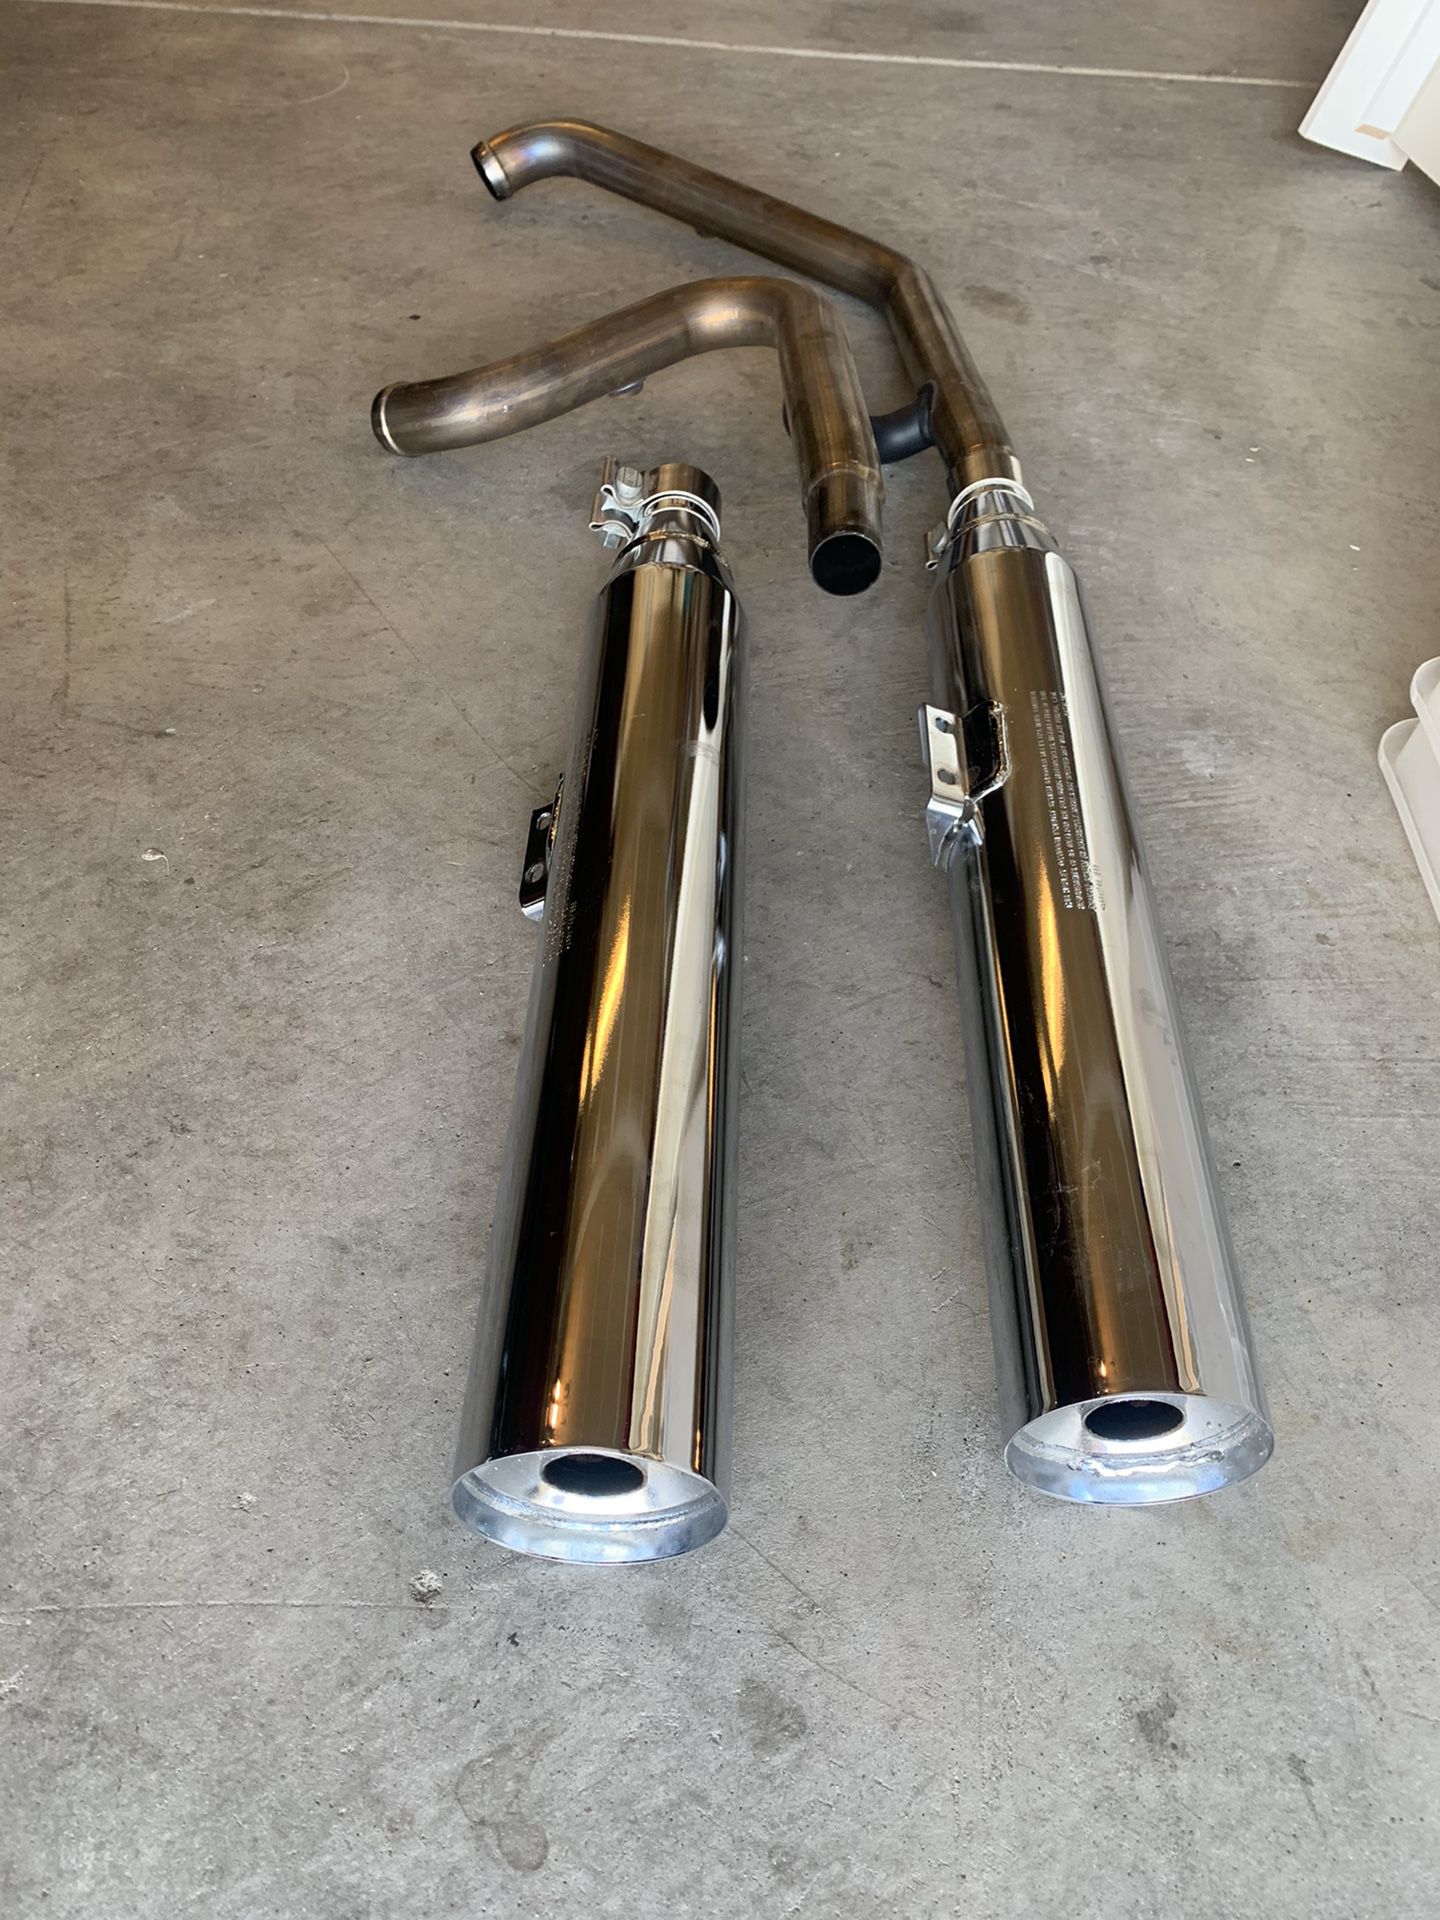 Harley Davidson tail pipes exhaust system